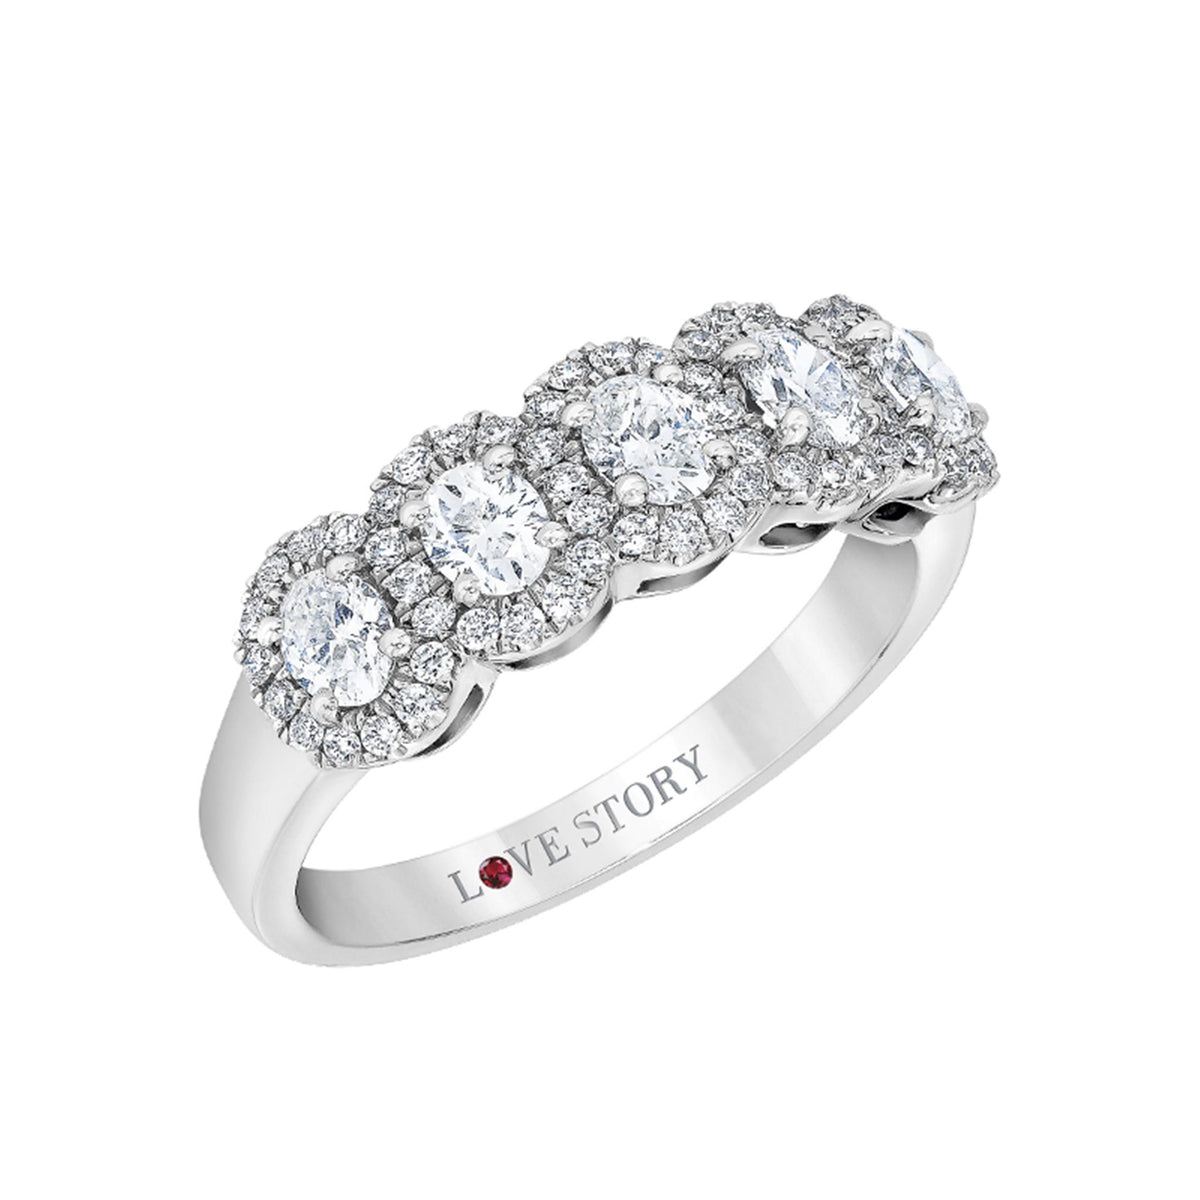 14Kt White Gold 5-Stone Oval Halo Ring With 1.00cttw Natural Diamonds